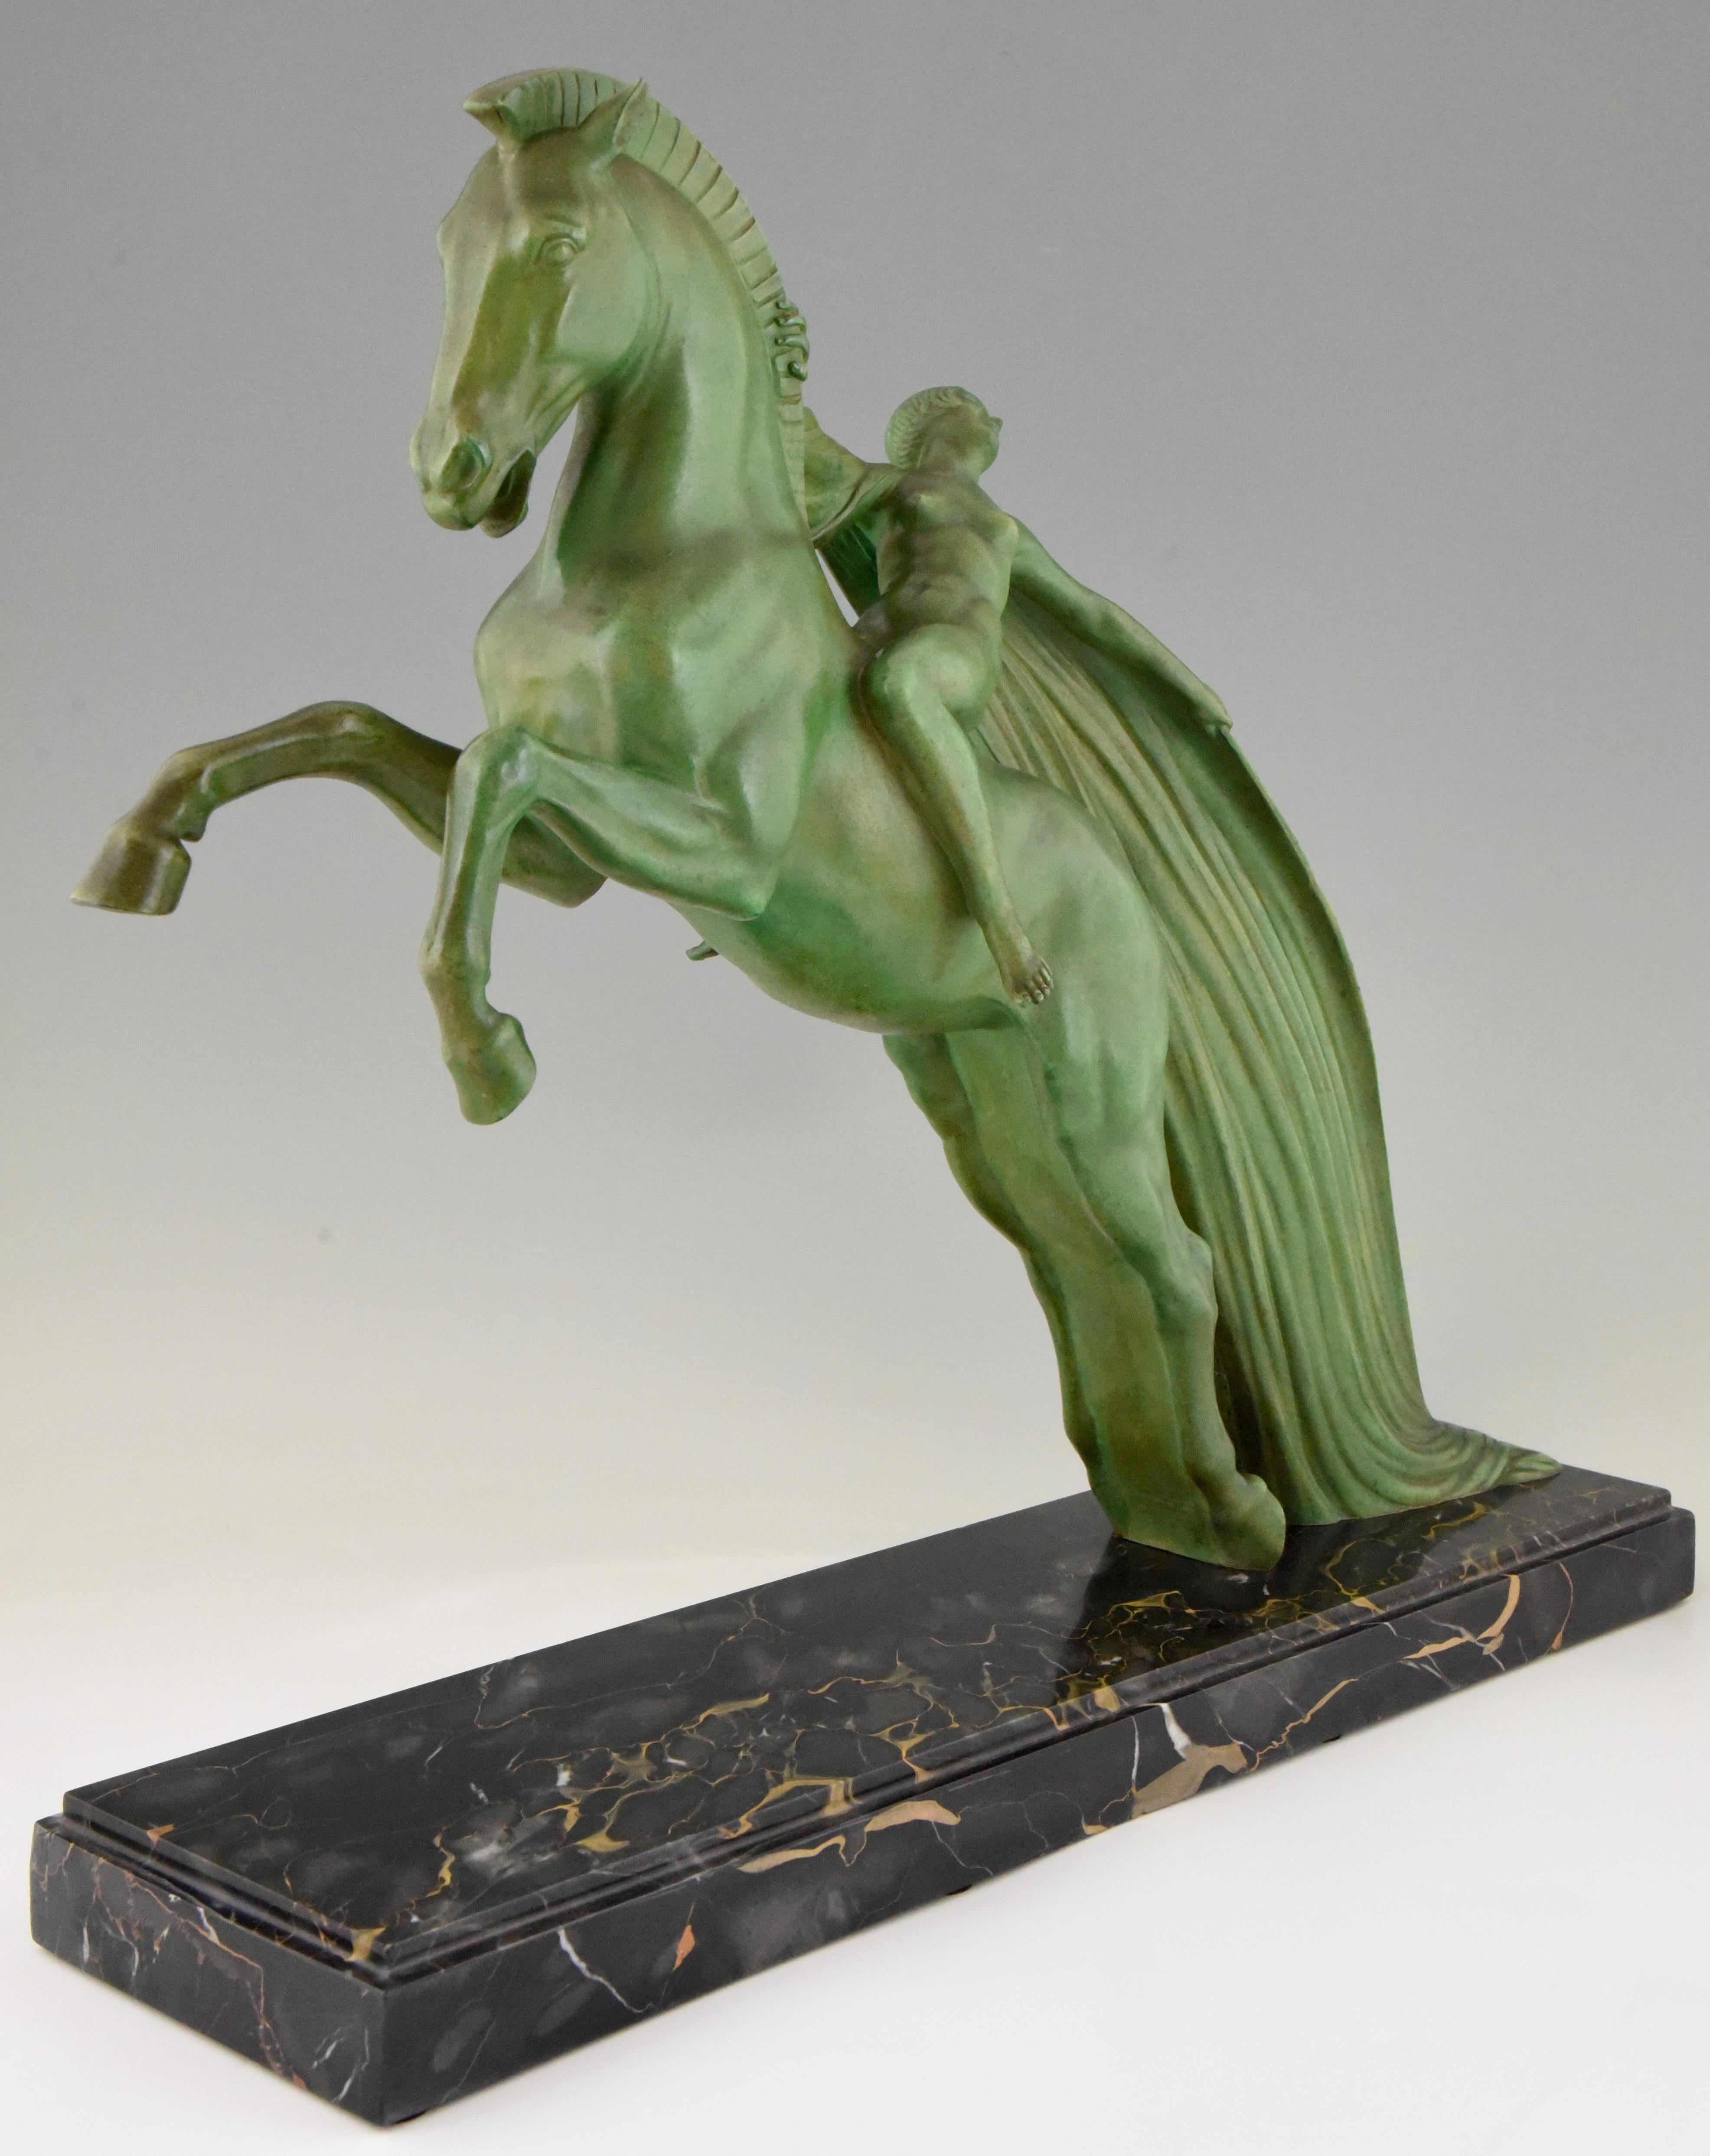 Art Deco Sculpture of a Female Nude on a Horse by Charles Charles  1930 France (Französisch)